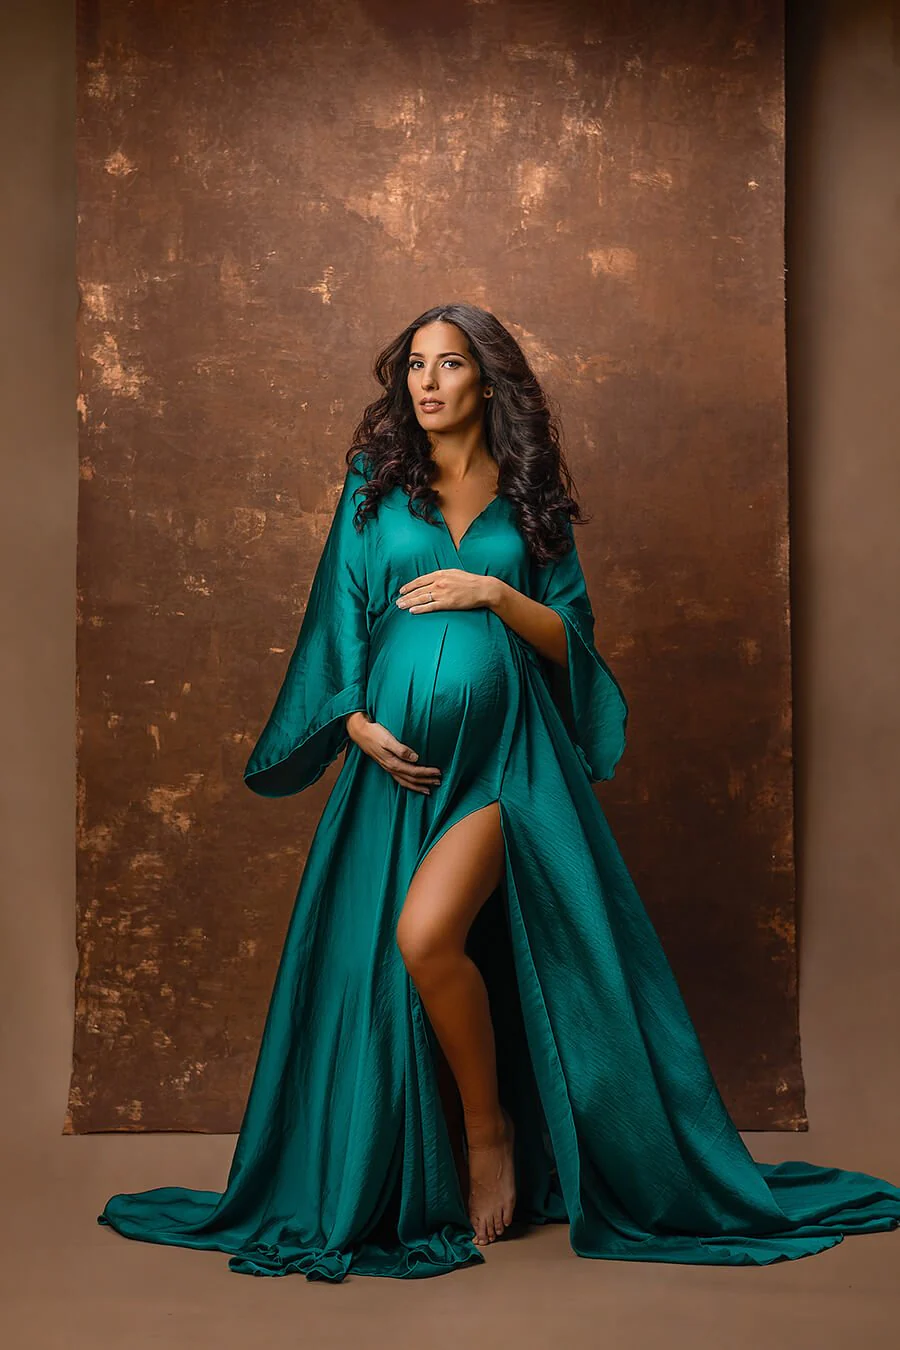 “Trendy Mom-to-Be: Keeping Up with Maternity Fashion Trends”